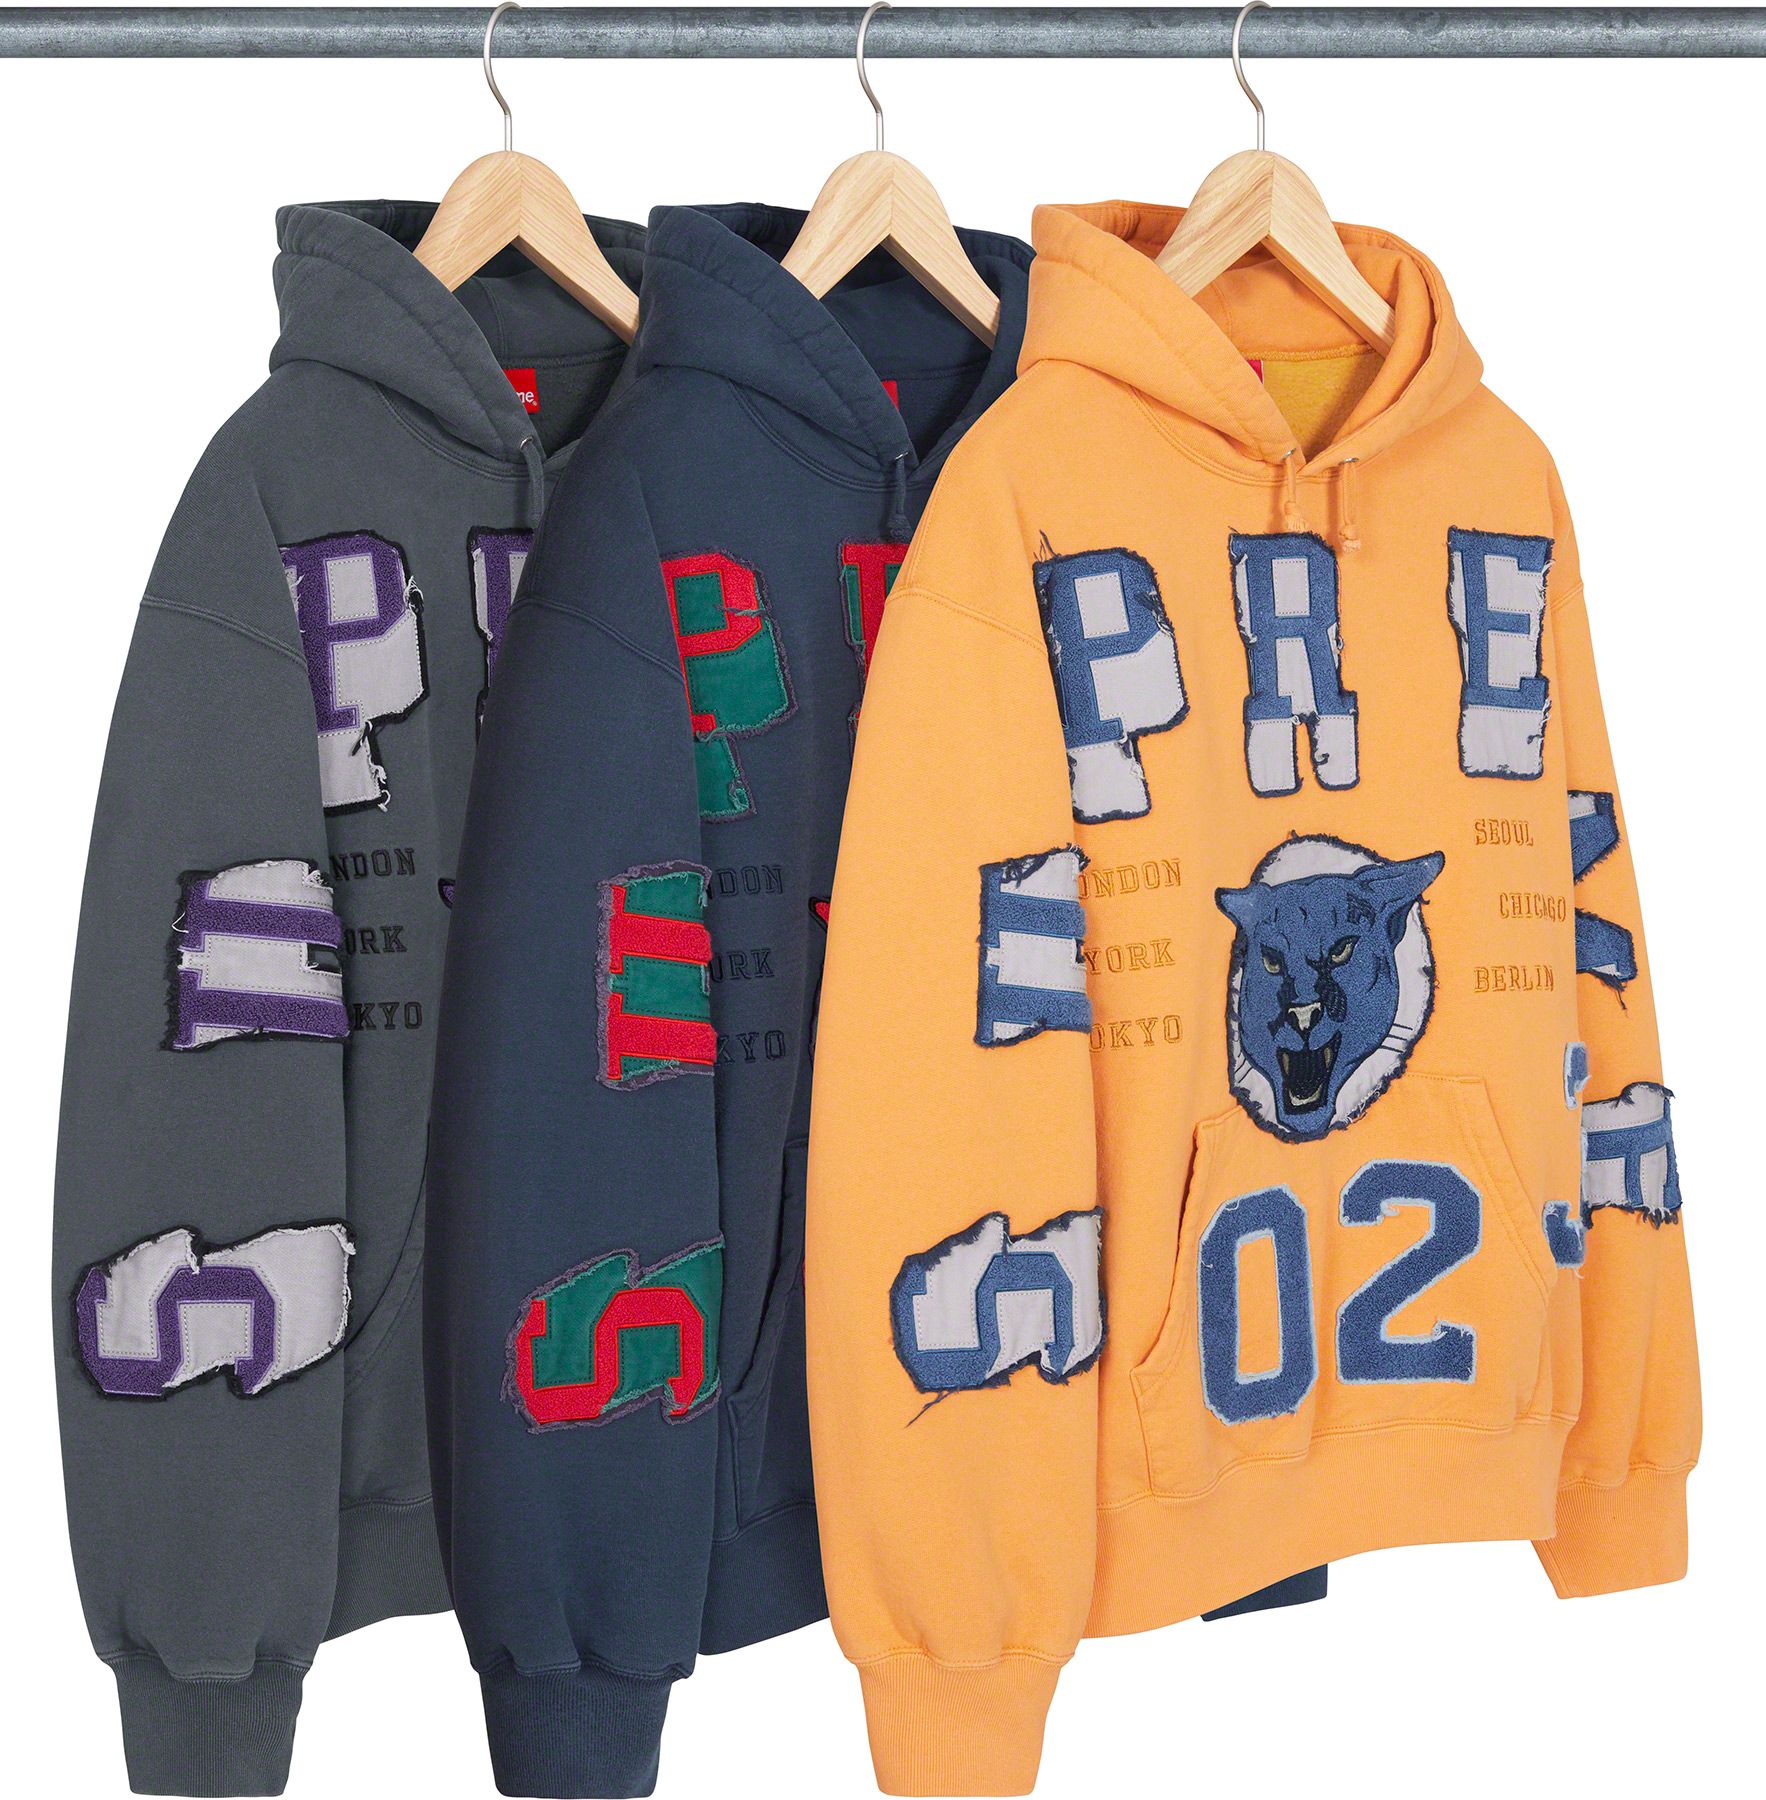 Washed Panther Hooded Sweatshirt - fall winter 2023 - Supreme